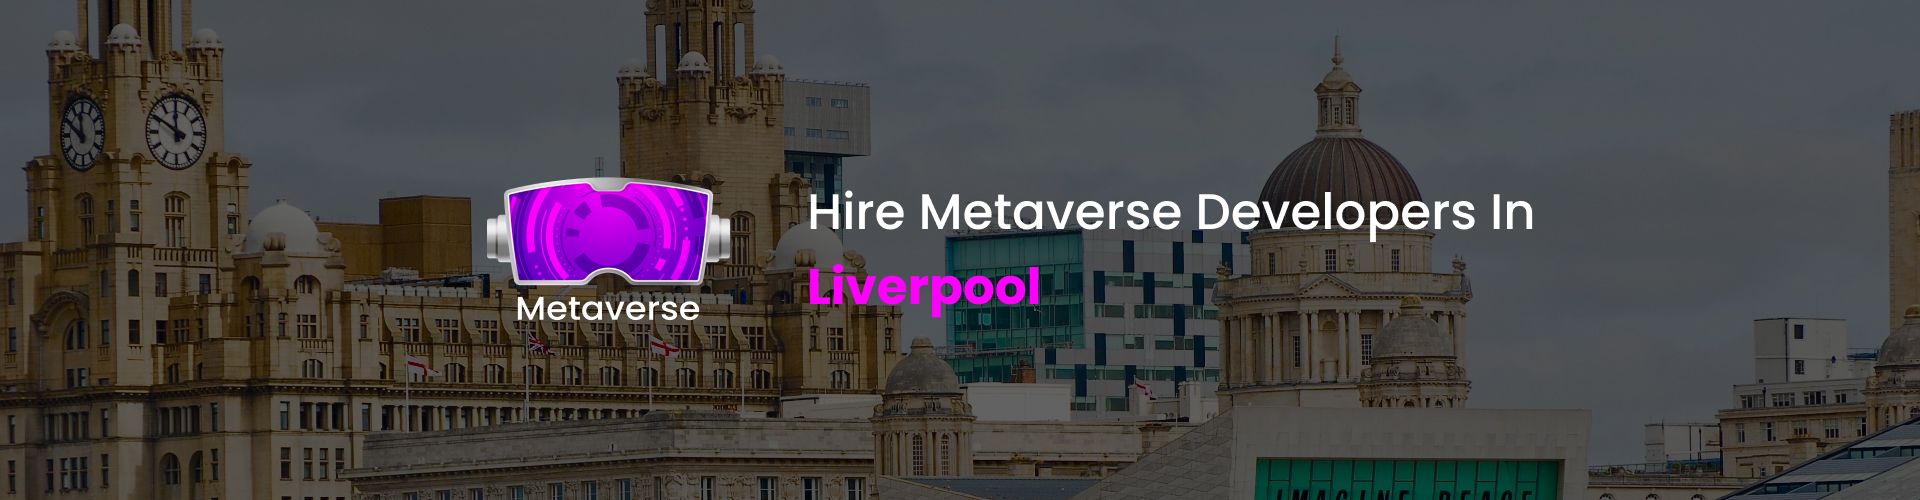 hire metaverse developers in liverpool